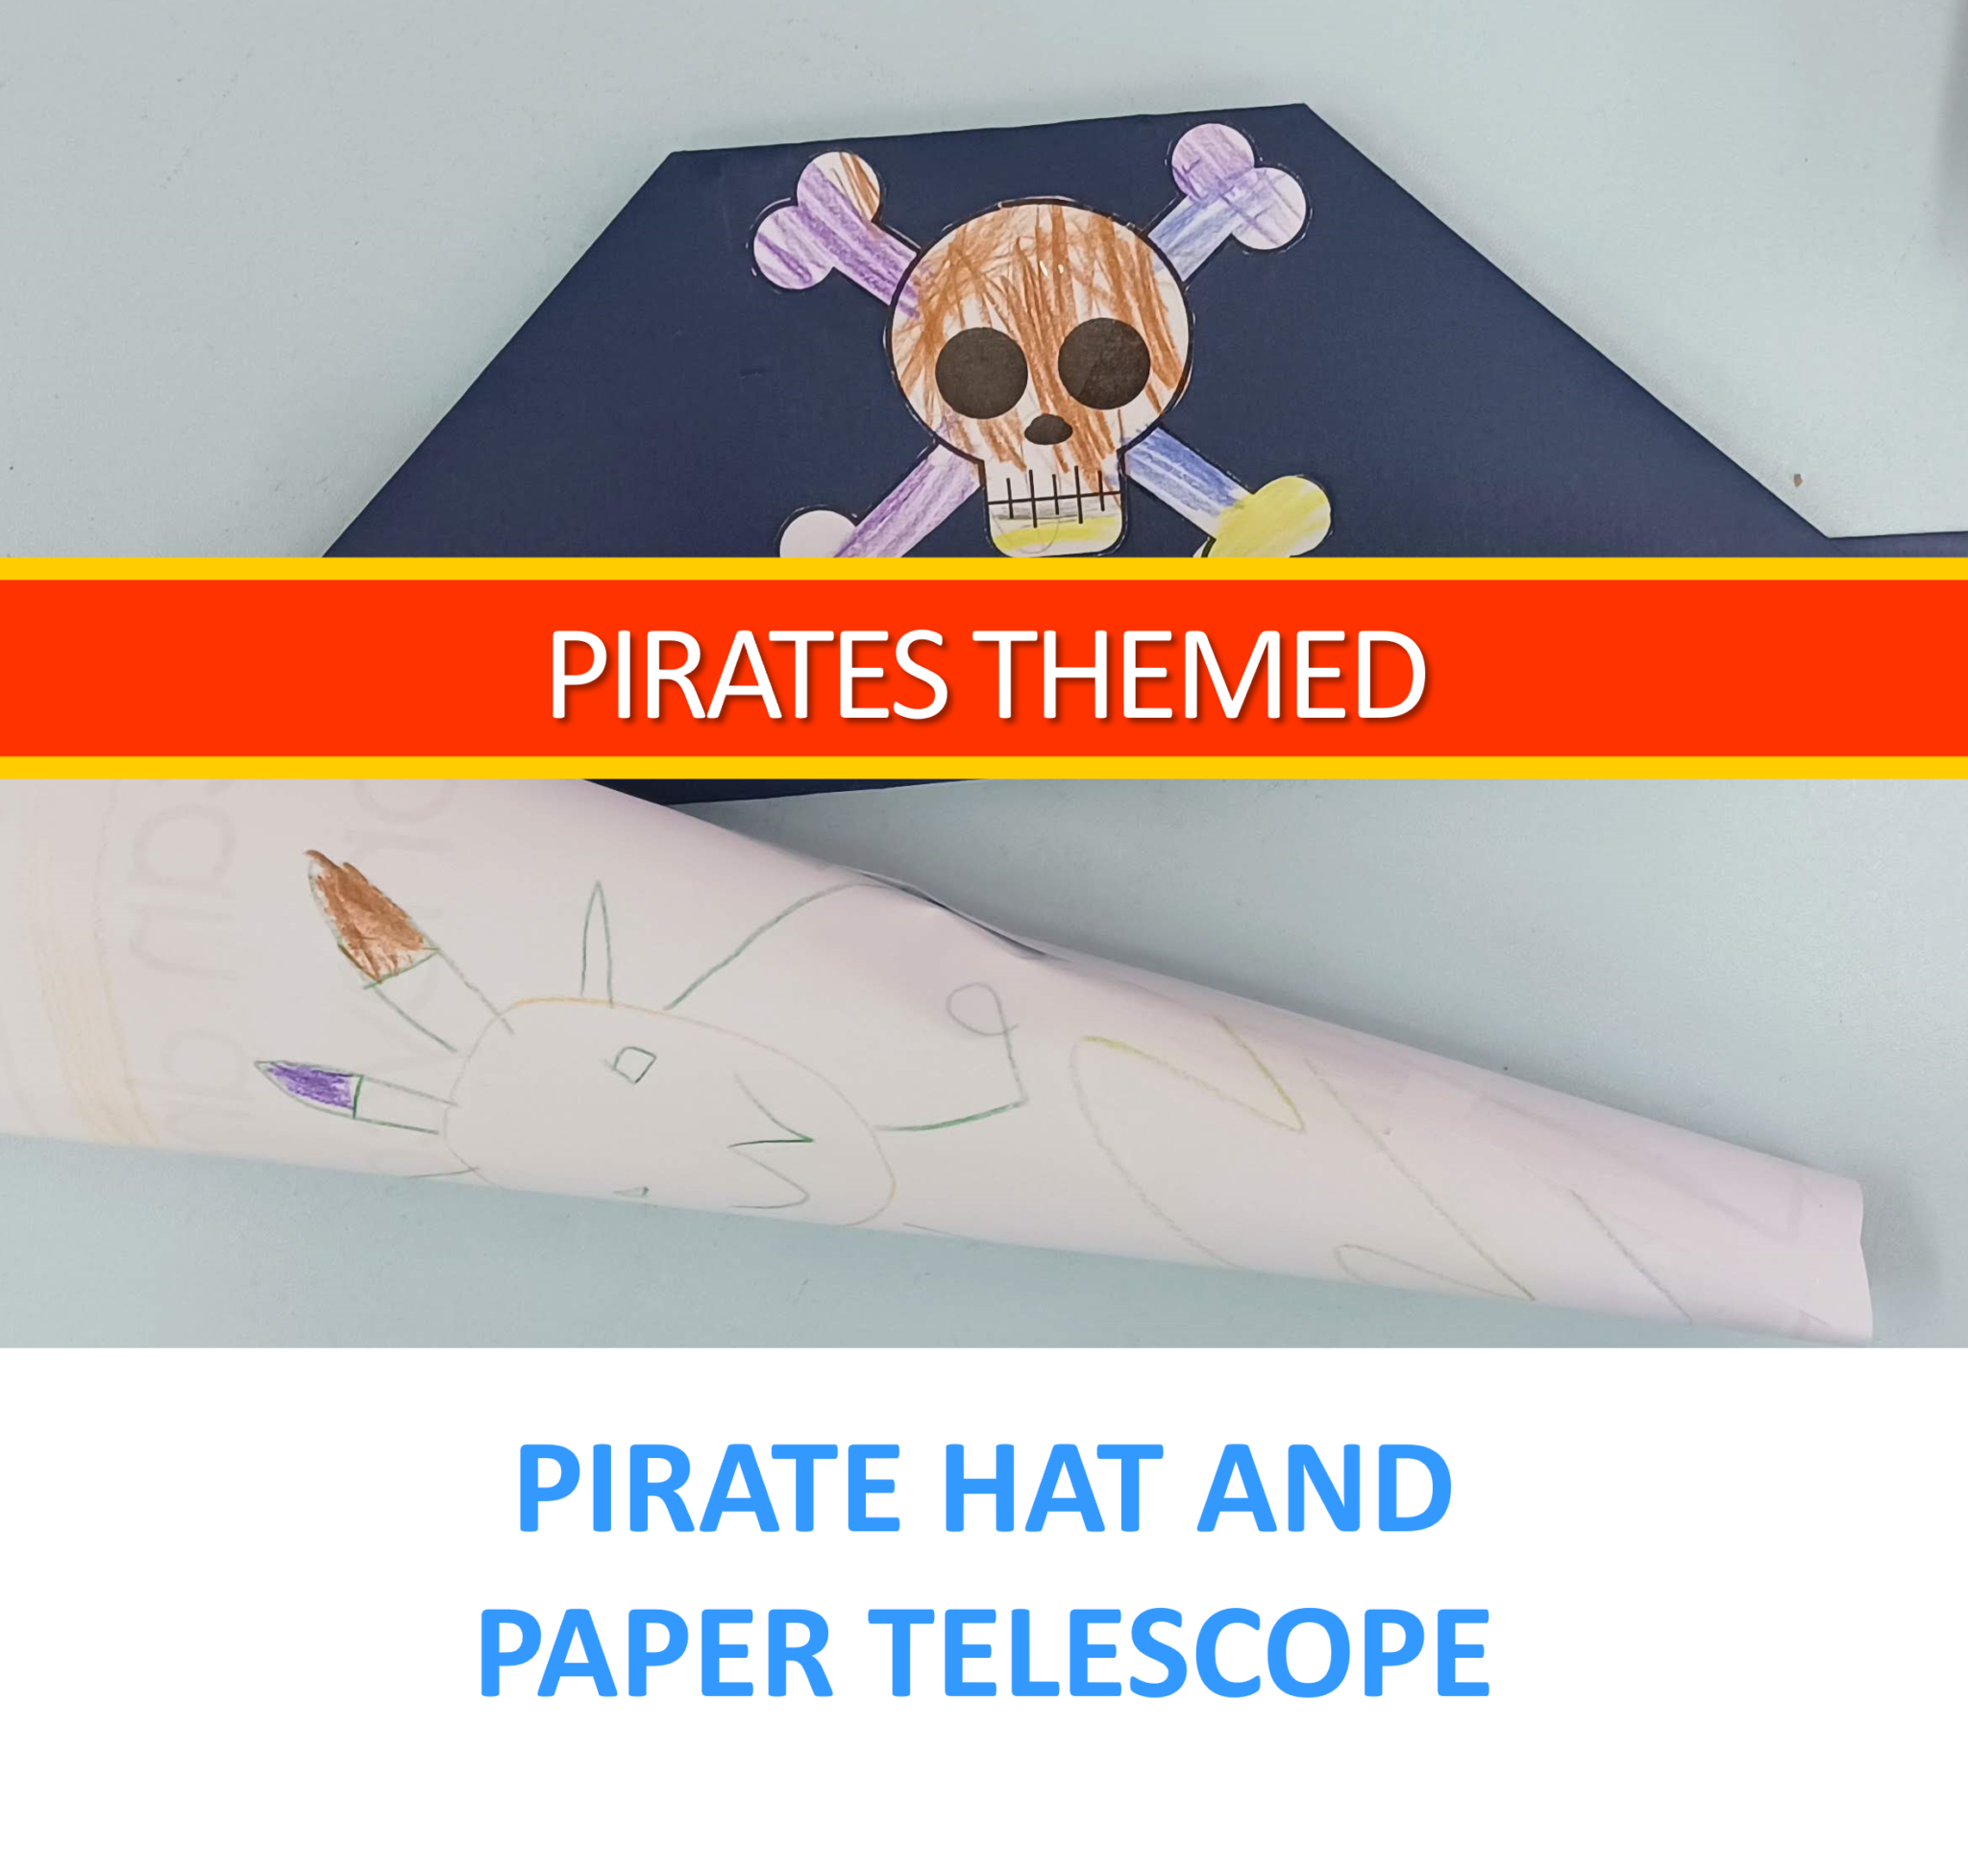 Pirates Themed Activities